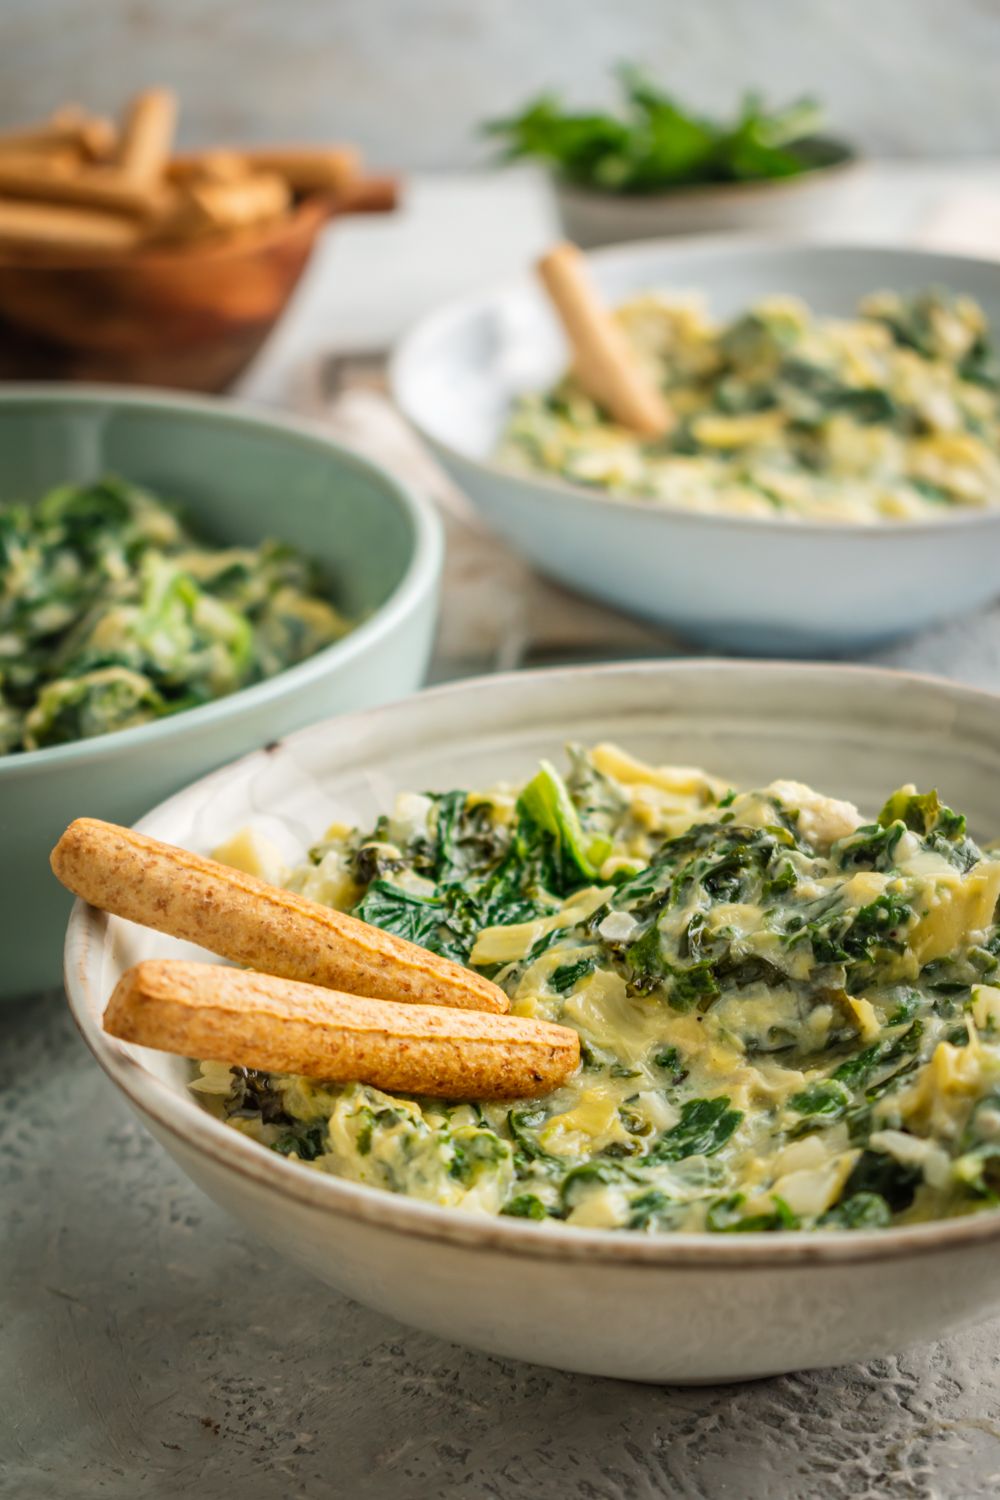 Artichoke and spinach dip with kale in a bowl with breadsticks.